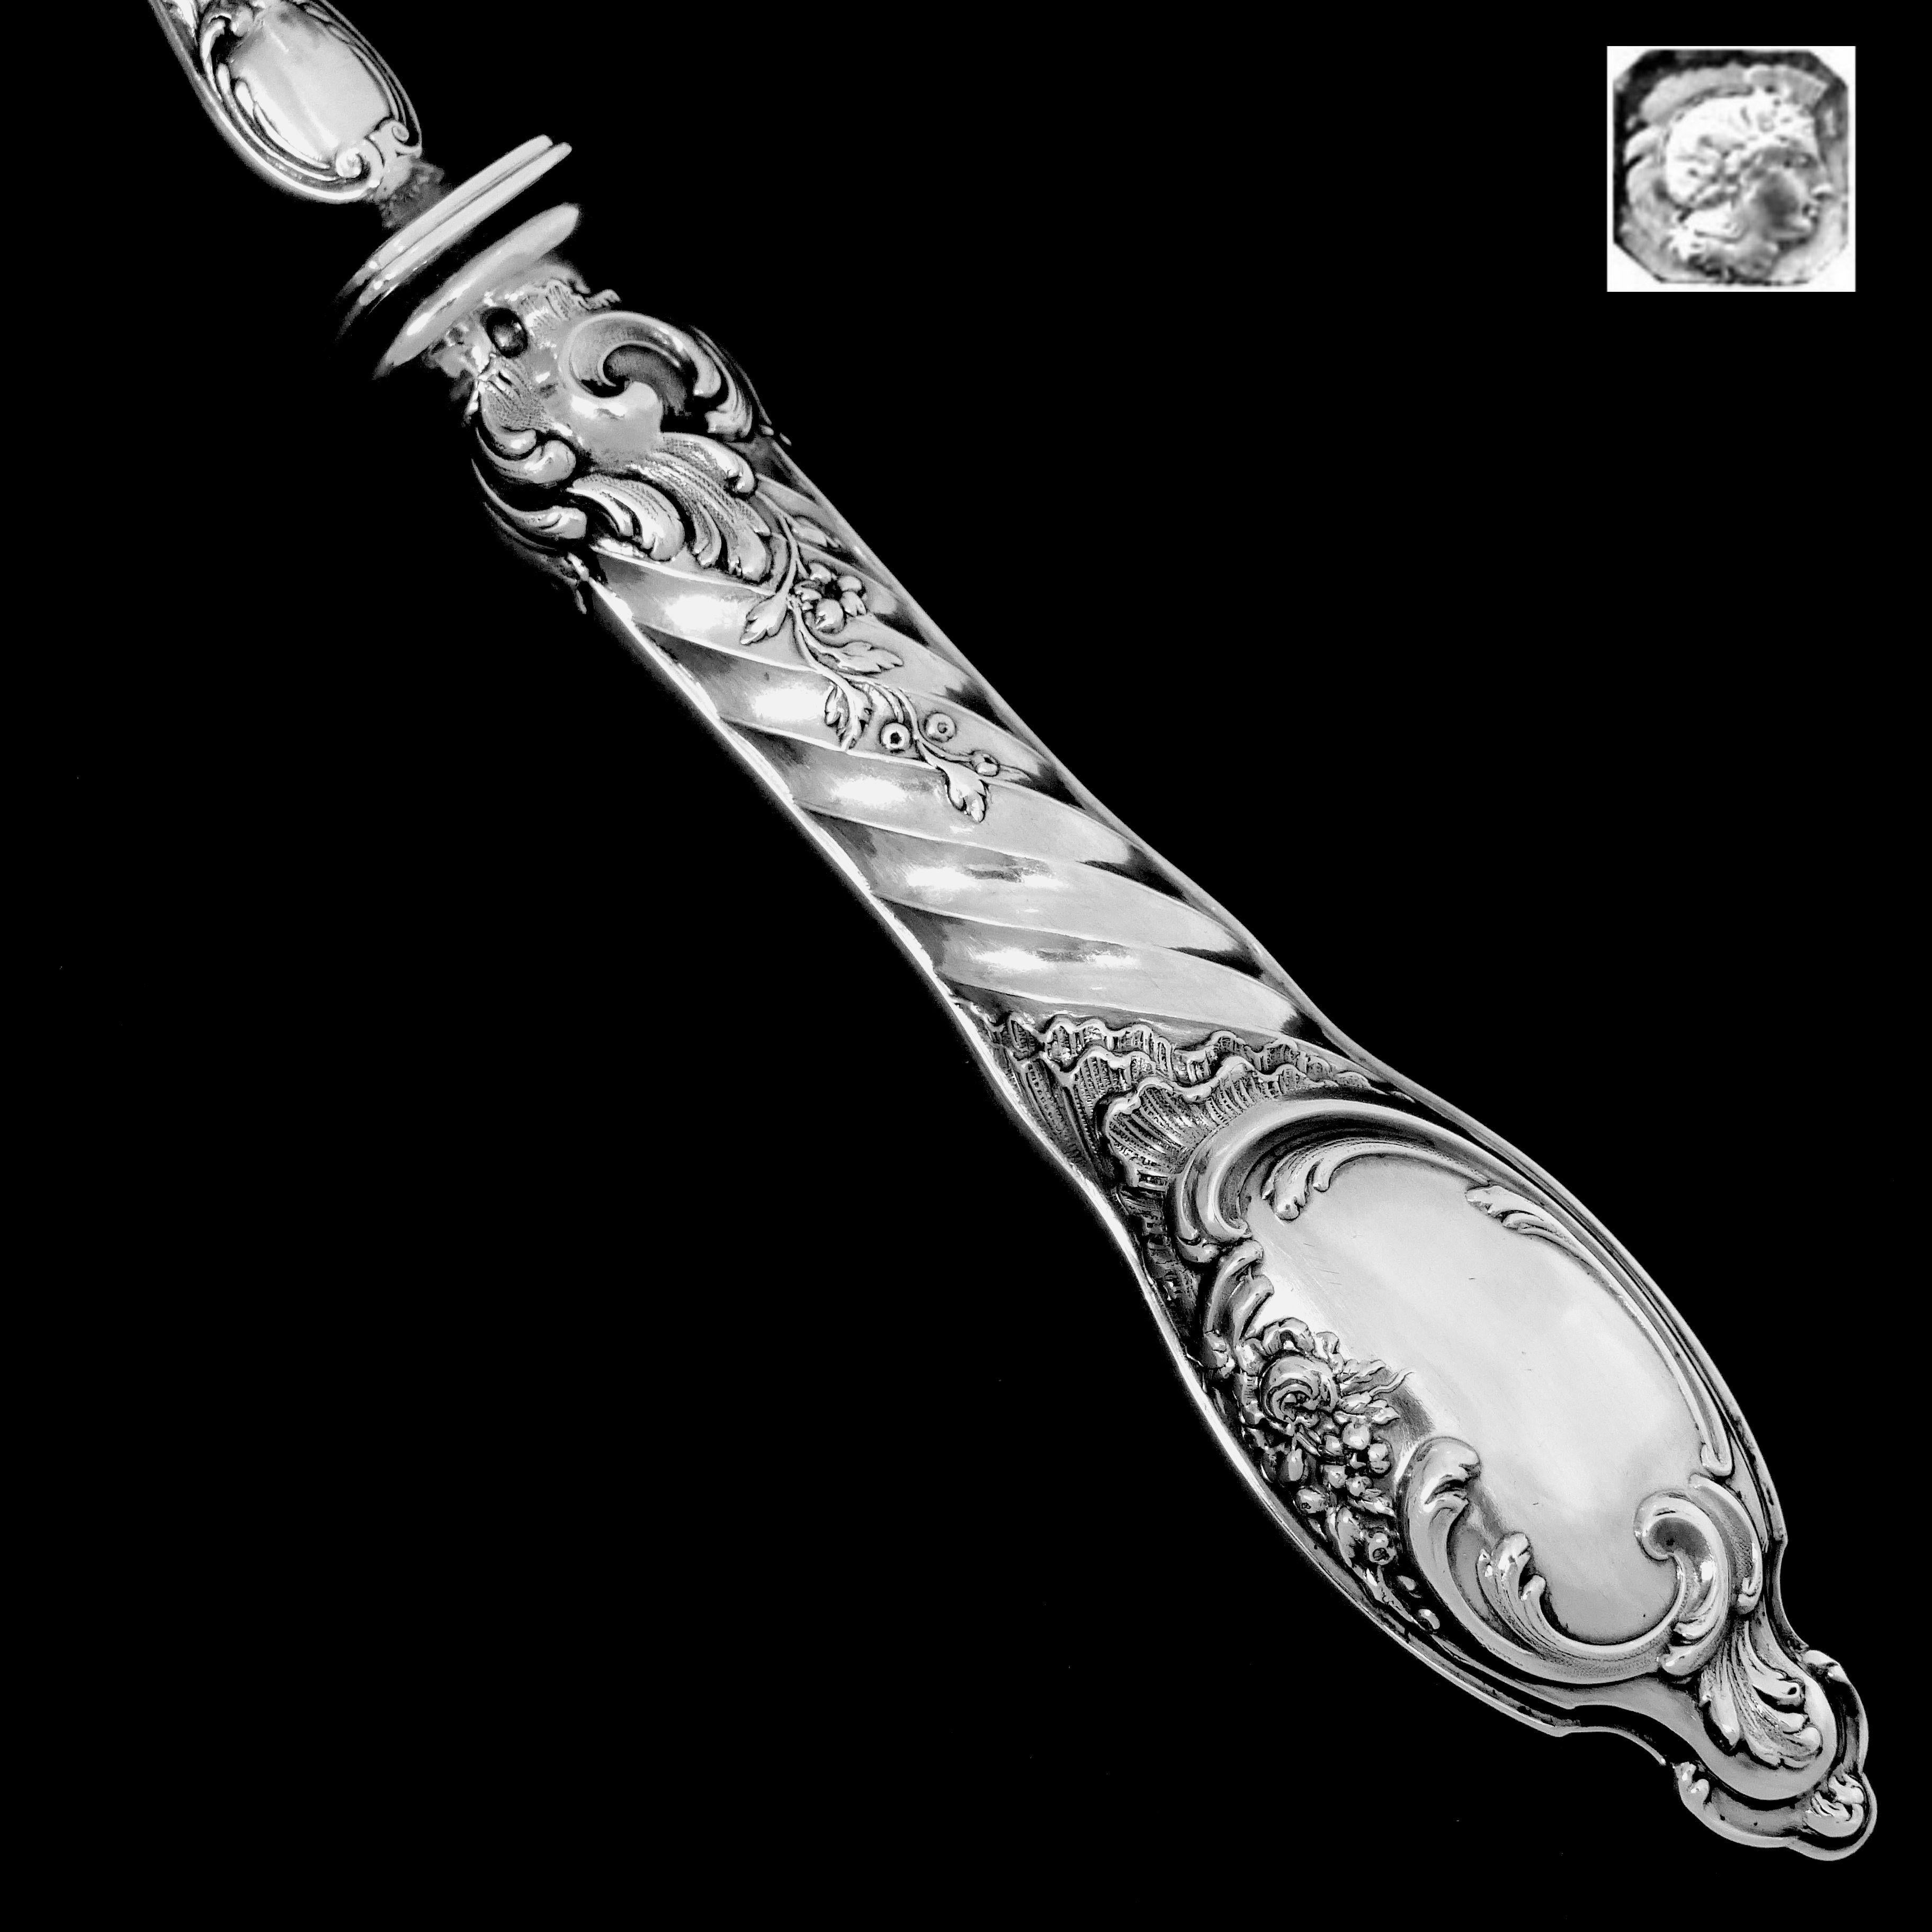 Puiforcat Rare French Sterling Silver Asparagus Pastry Toast Server 1